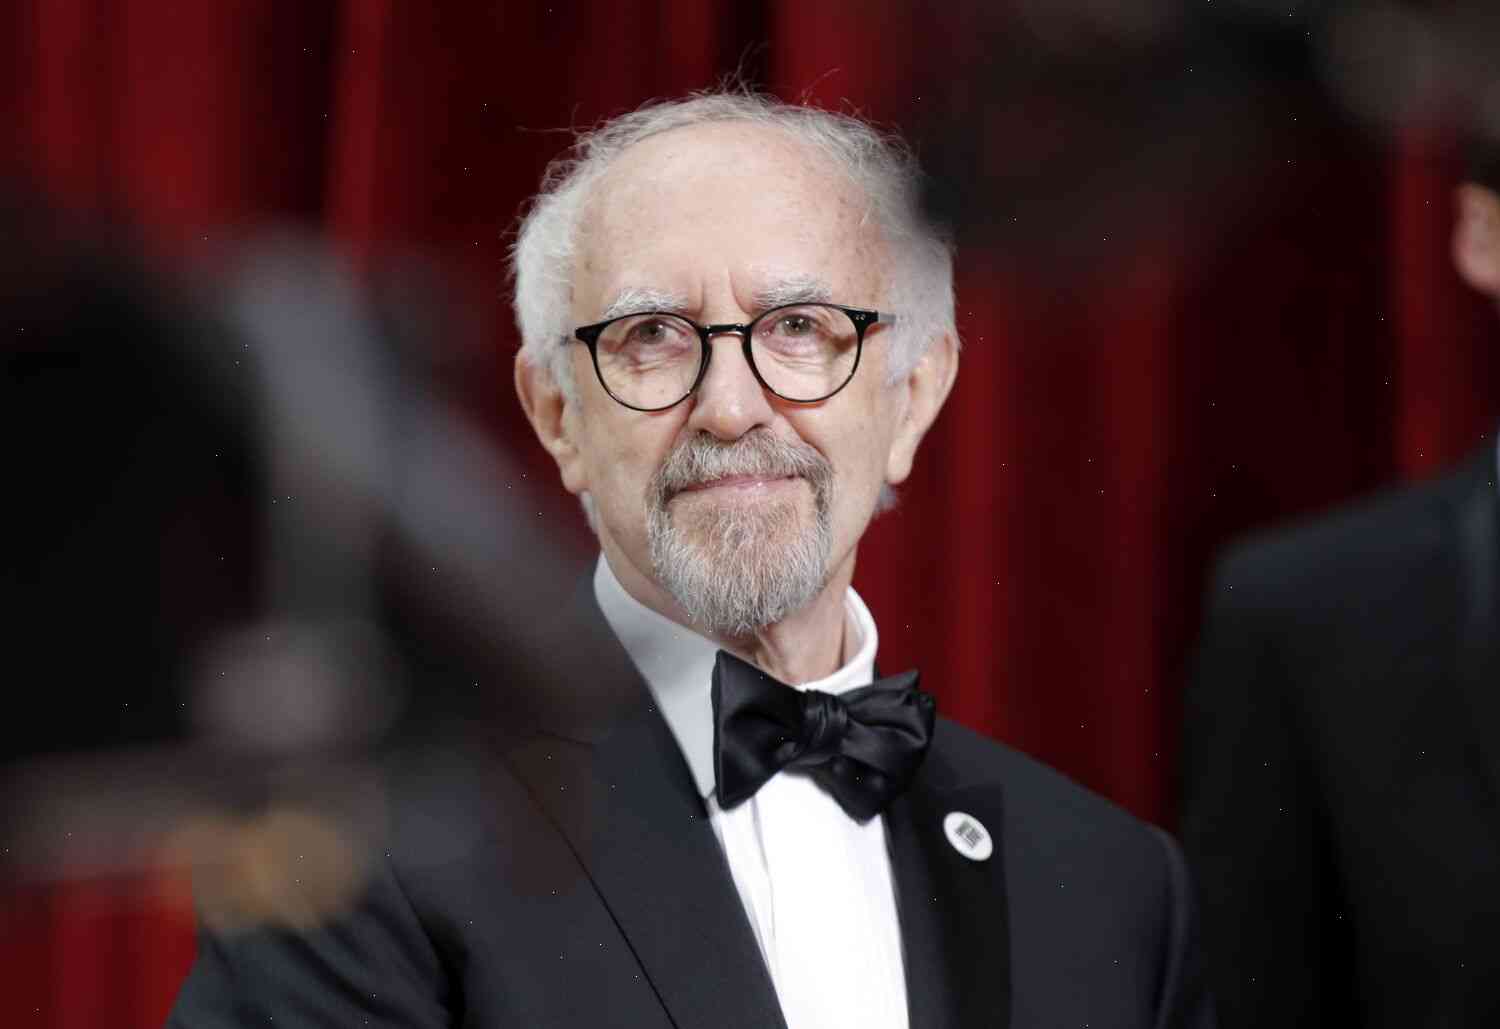 Jonathan Pryce: 'The Crown' is a period drama about Queen Elizabeth II